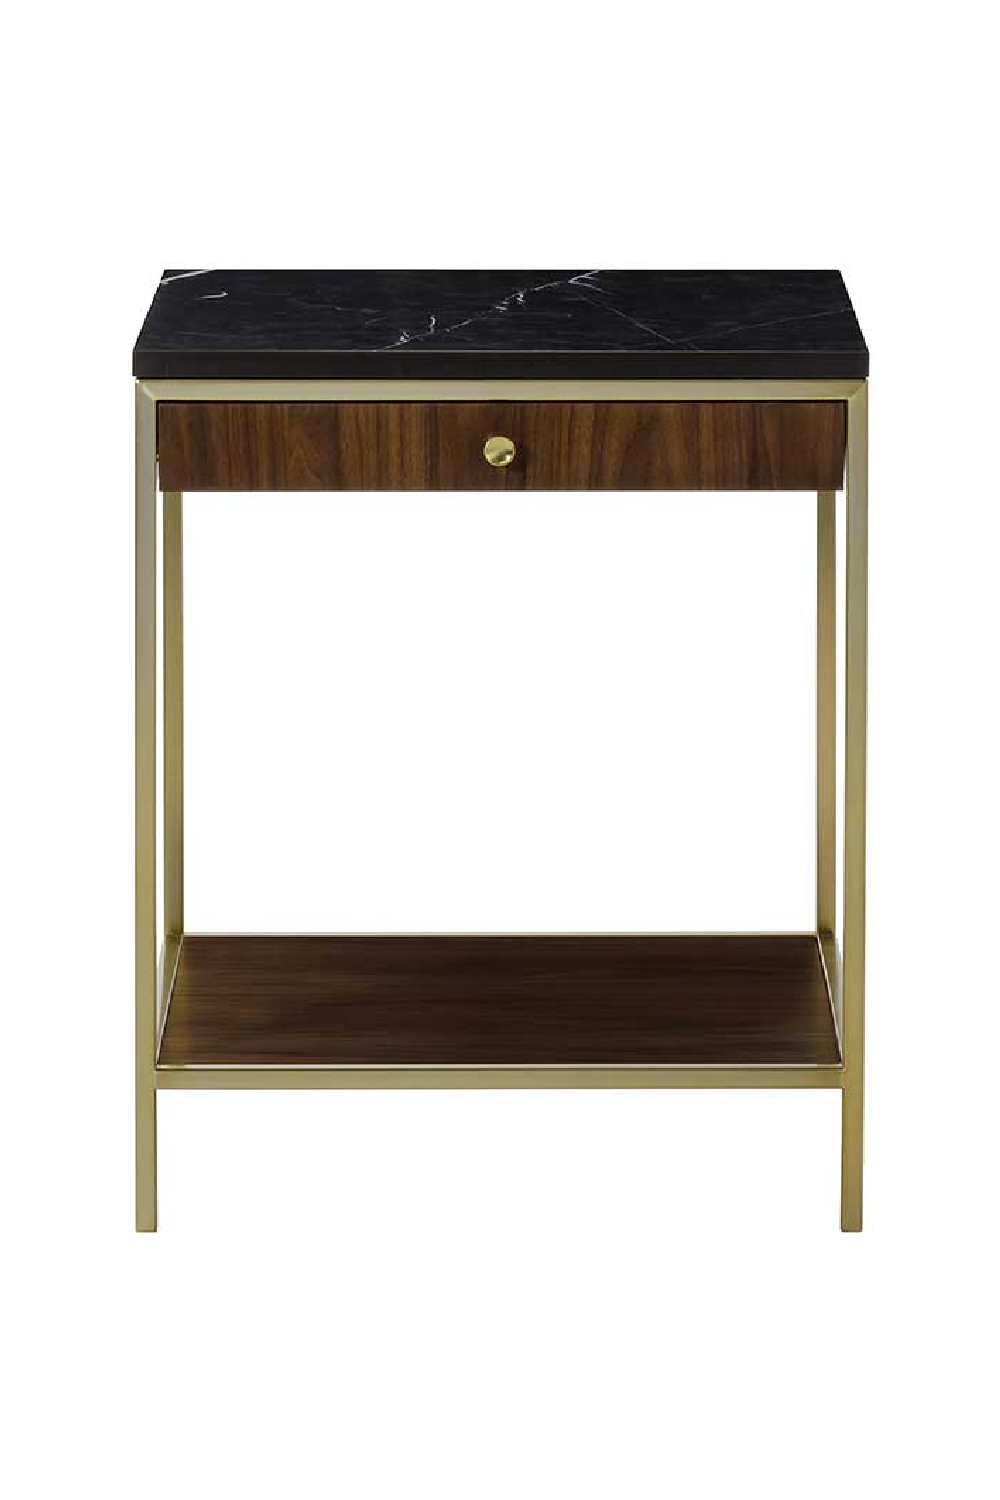 Black Marble Top Square Side Table S | Andrew Martin Chester  | Woodfurniture.com